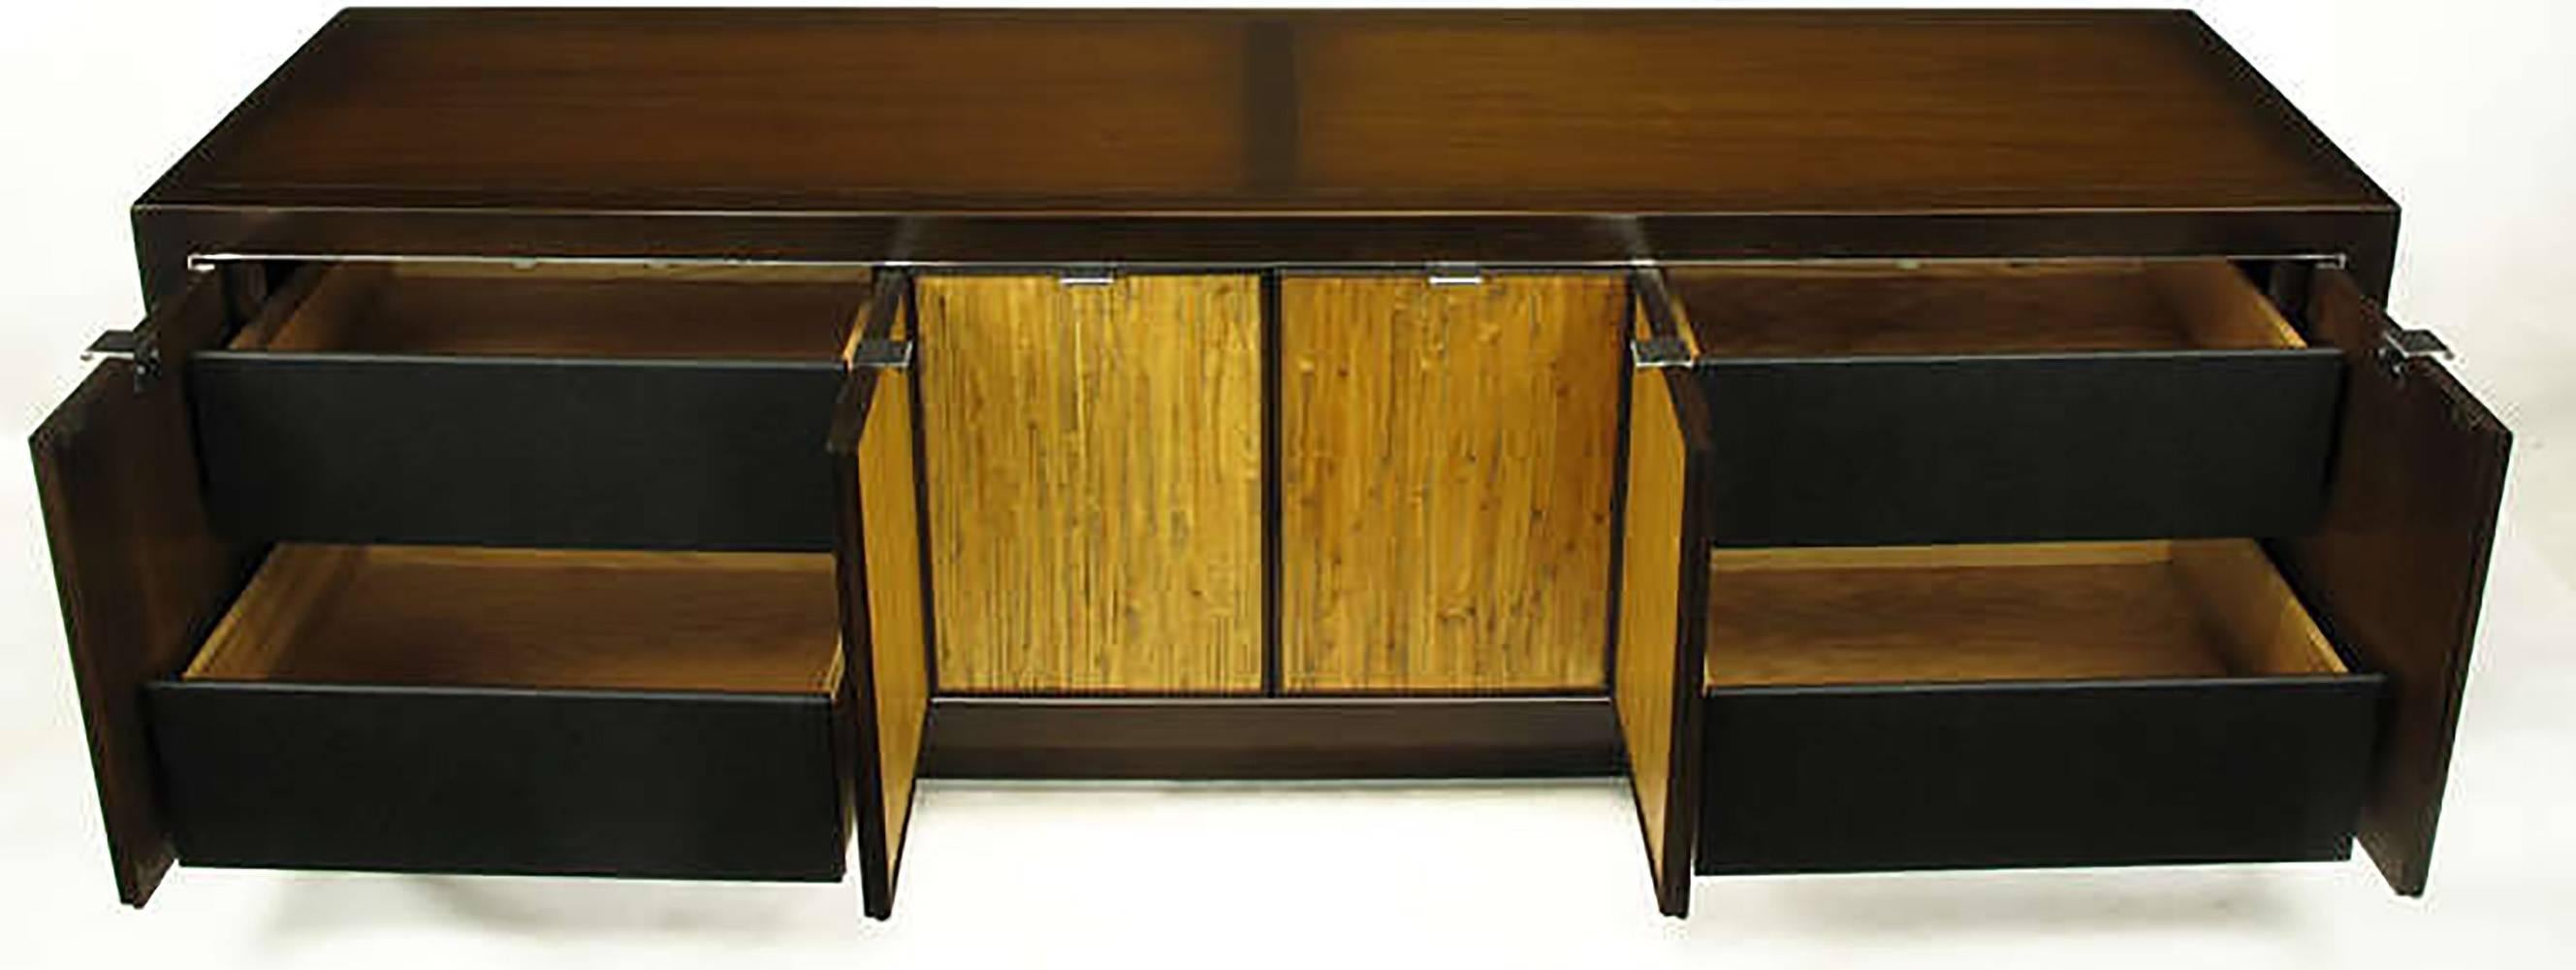 Mid-20th Century Dark Walnut and Grass Cloth Low Cabinet after Harvey Probber For Sale